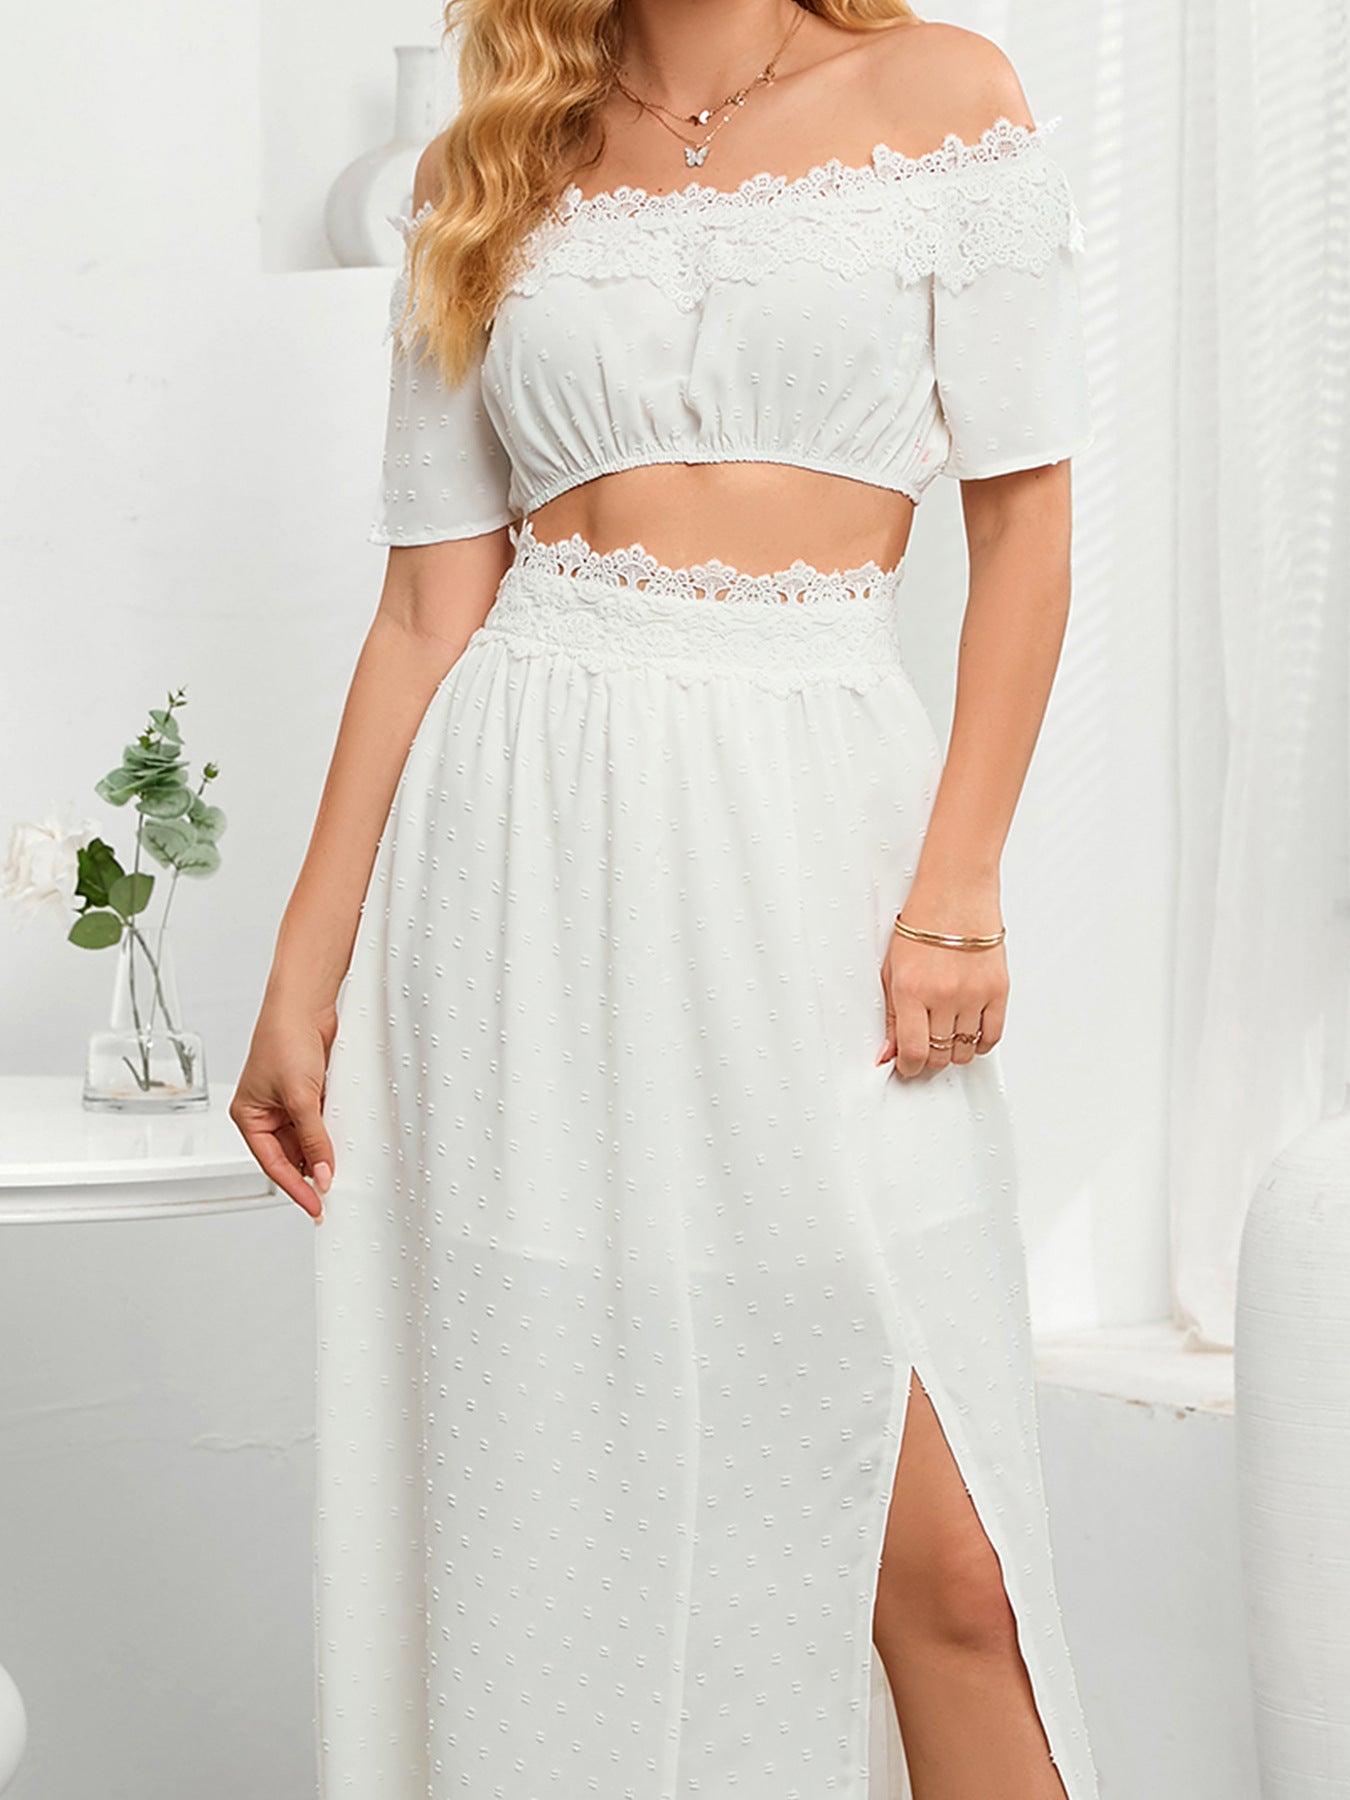 Swiss Dot Lace Trim Cropped Top and Slit Skirt Set